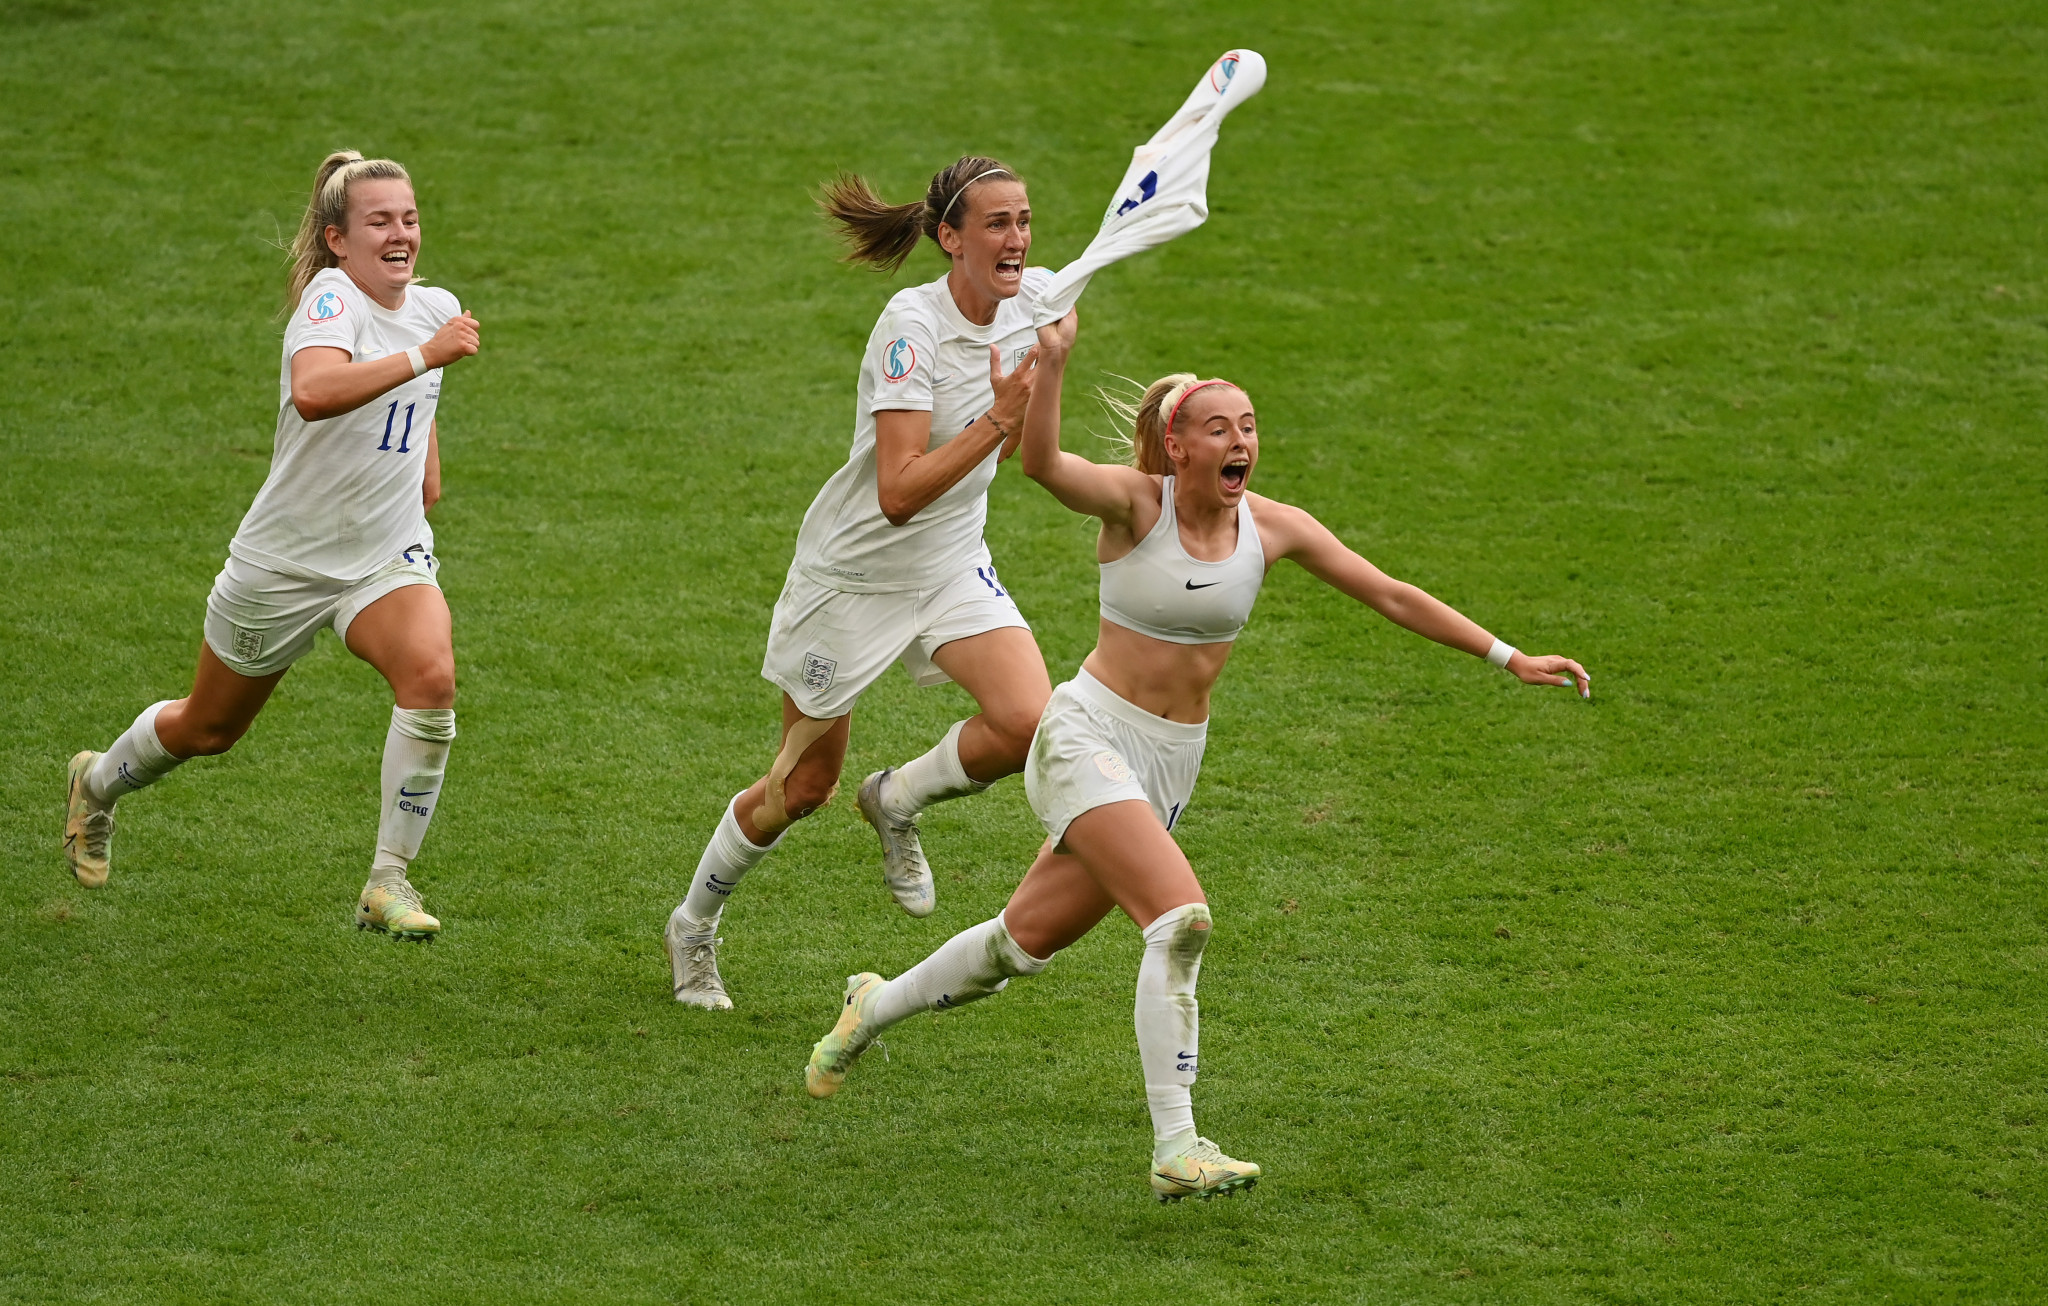 Chloe Kelly, pictured above with her shirt off in celebration, scored the winning goal as England beat Germany to triumph at Women's Euro 2022 and the end the nation's 56 year gap since their last major international football trophy ©Getty Images